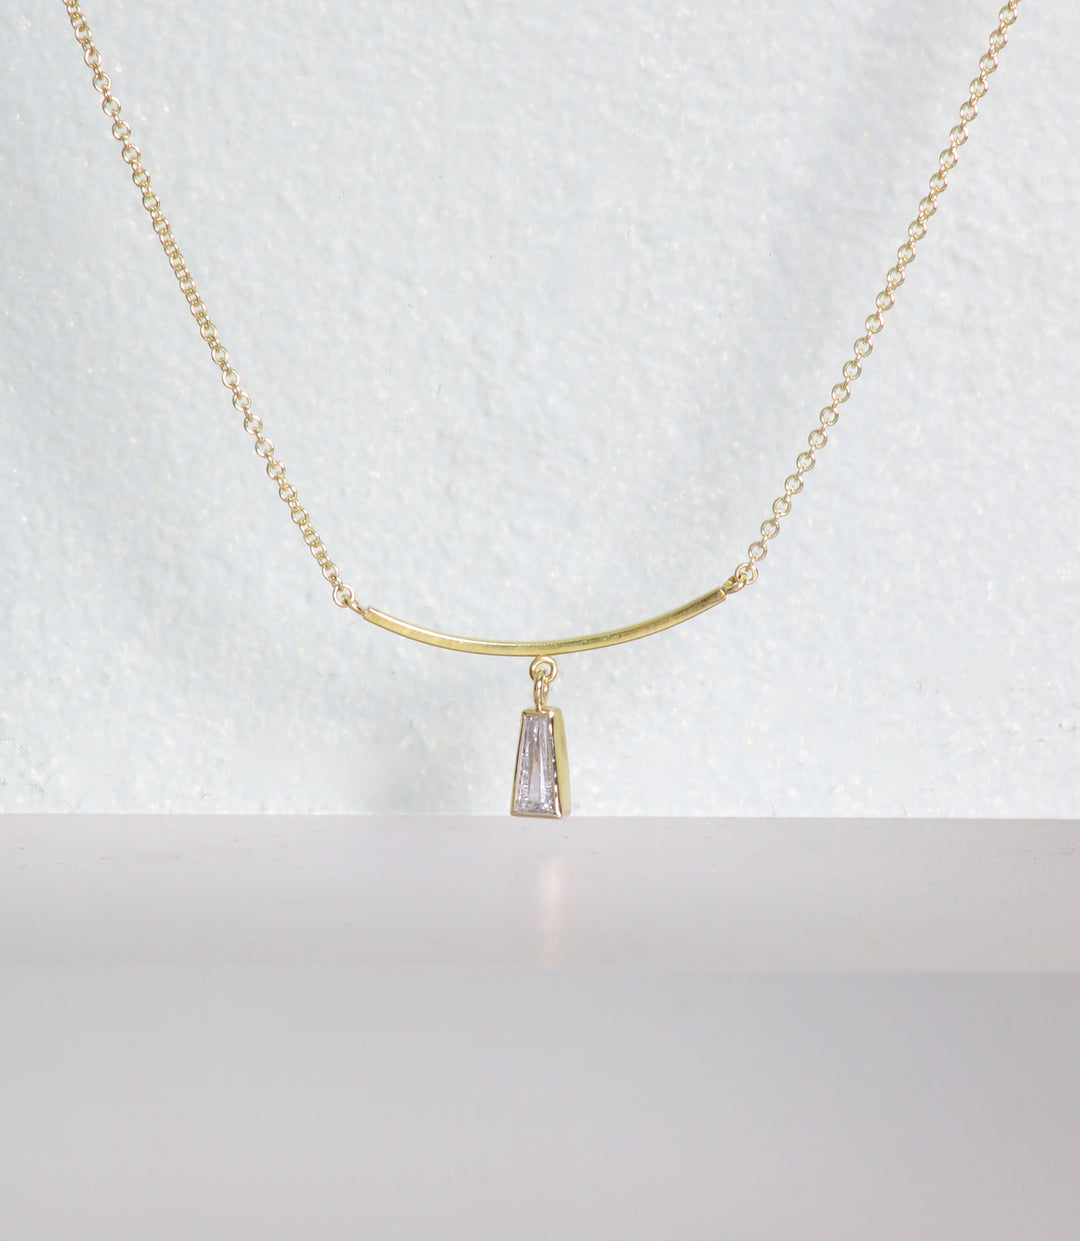 Gold Bar and Diamond Necklace (08936)